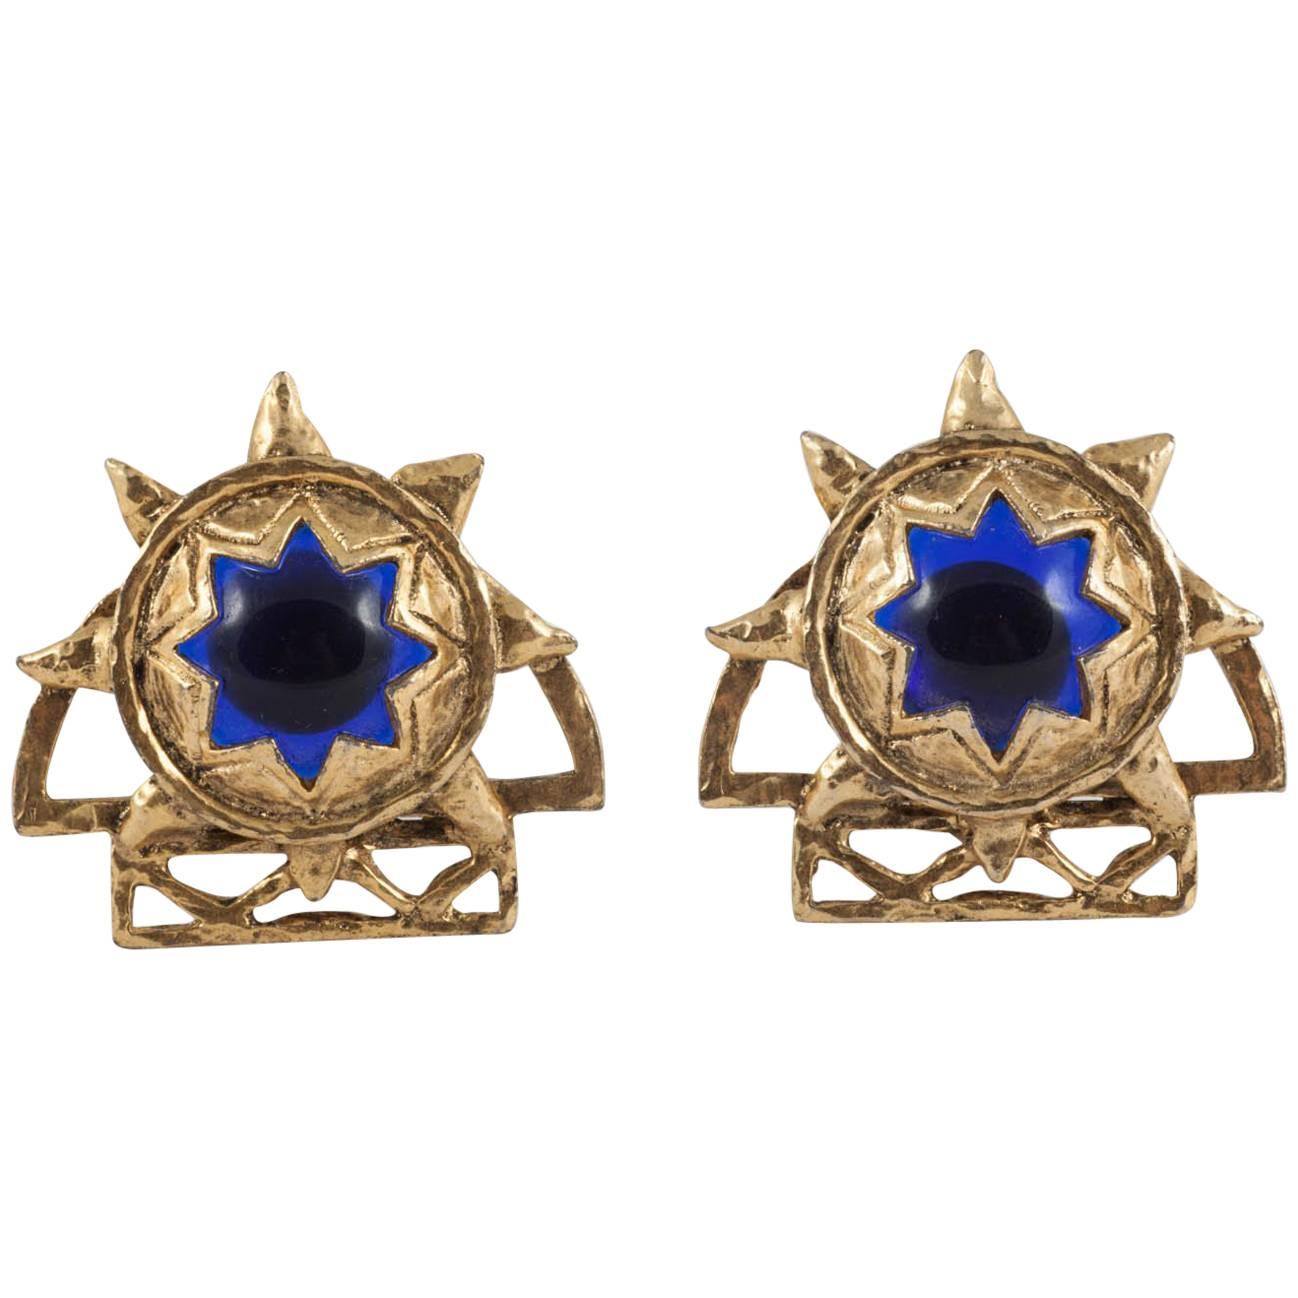  Blue glass cabochon and rusticated gilt earrings, Claire Deve, 1980s